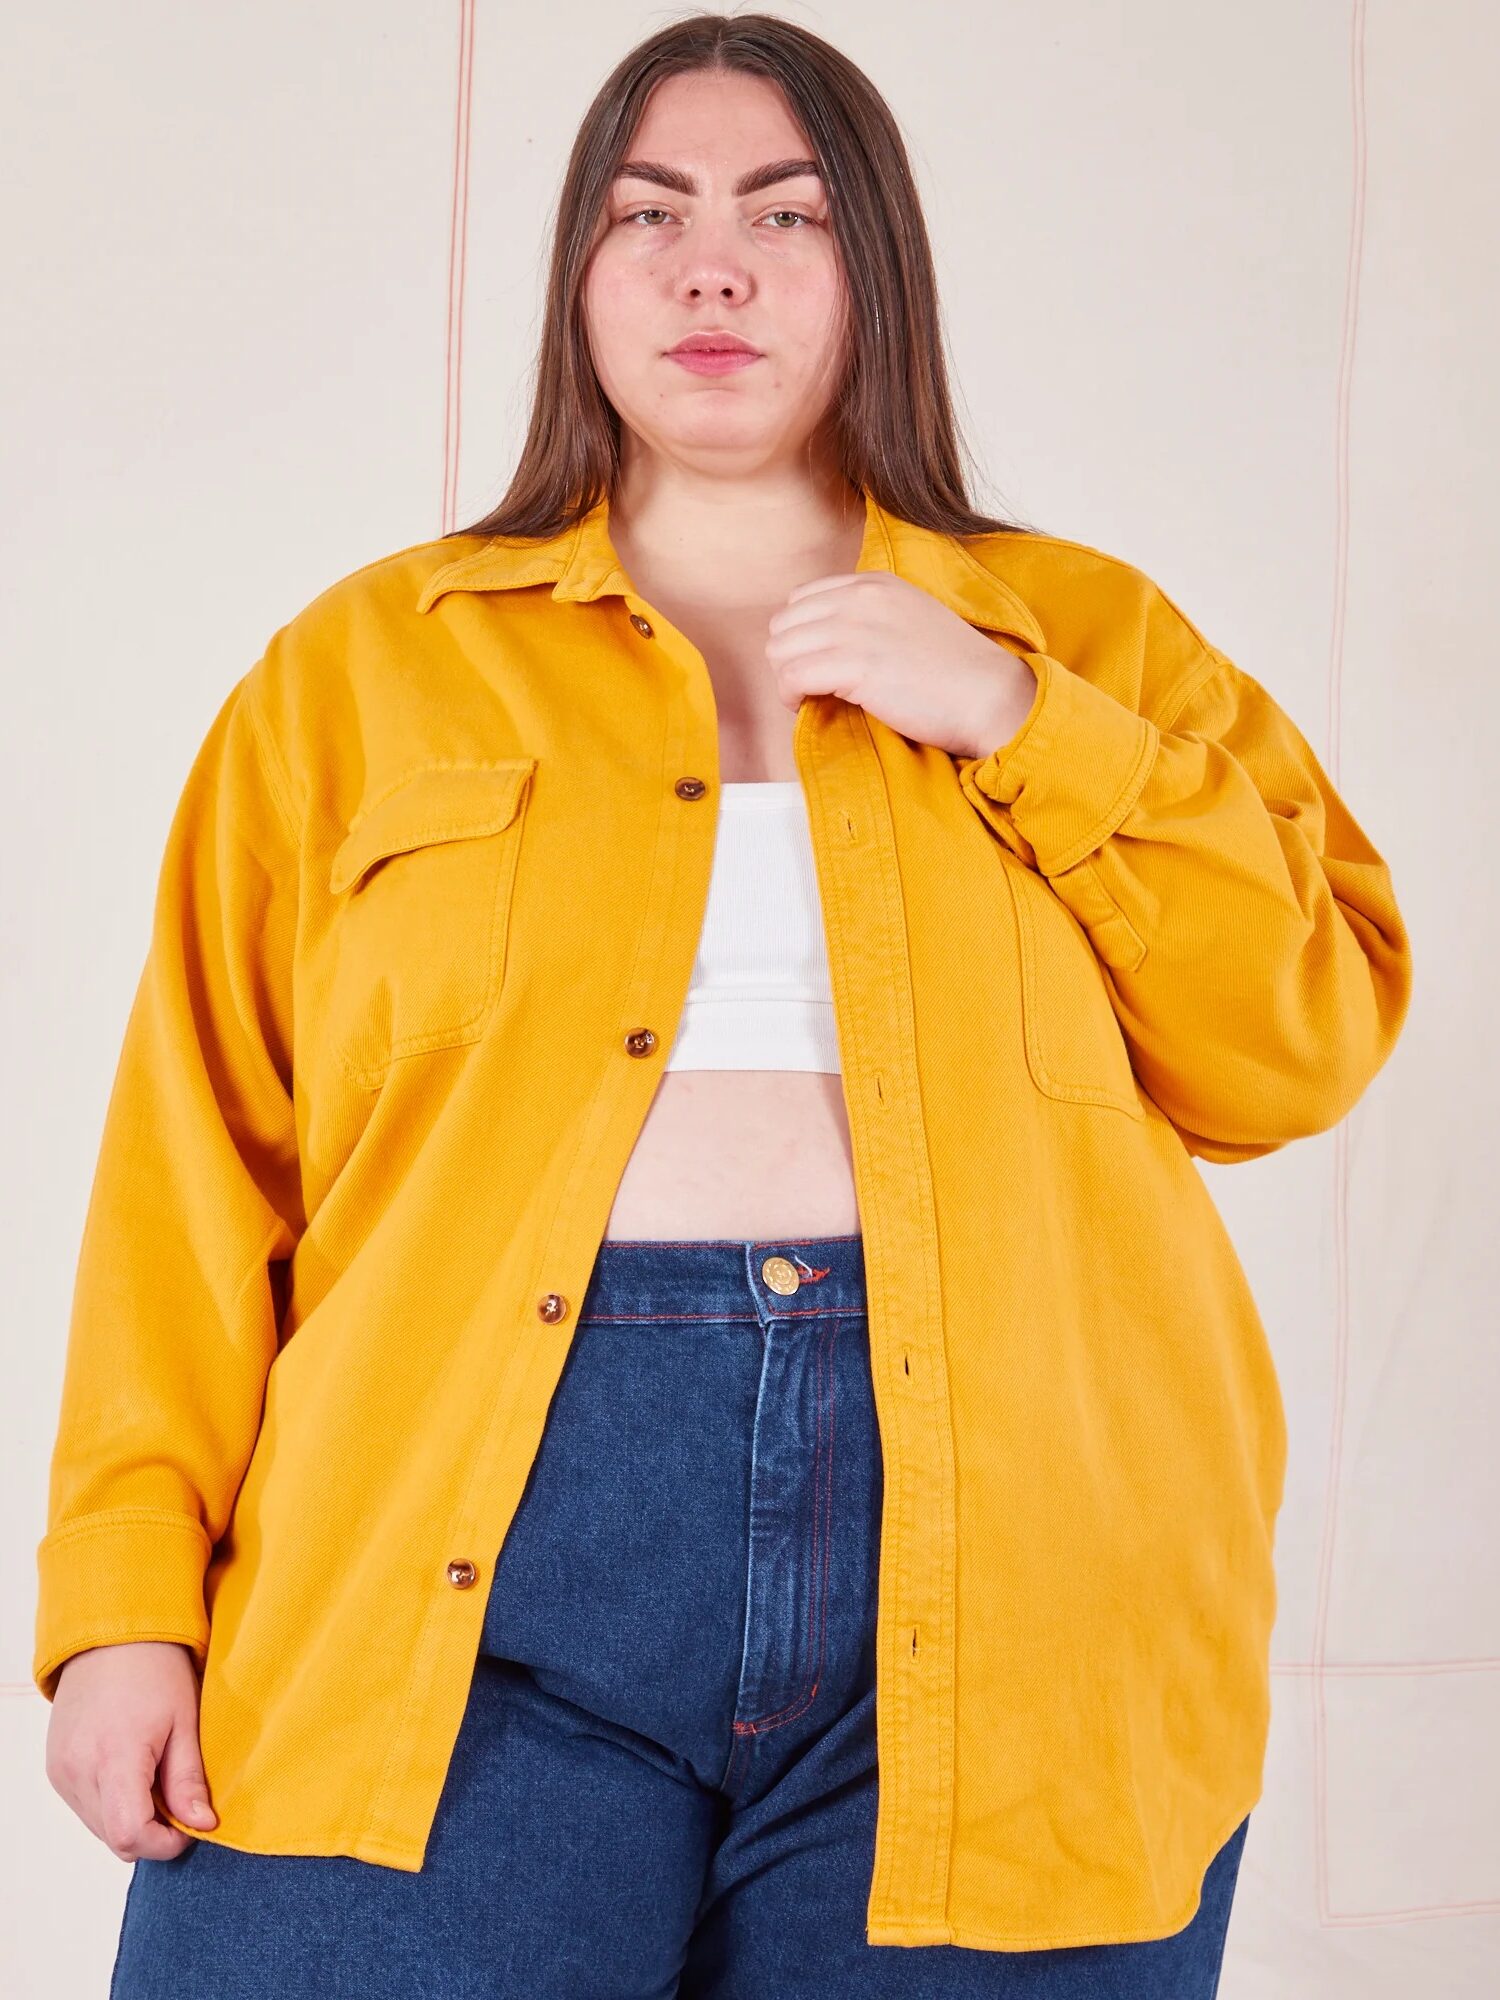 A woman in a yellow shirt and blue jeans posing for a photograph.